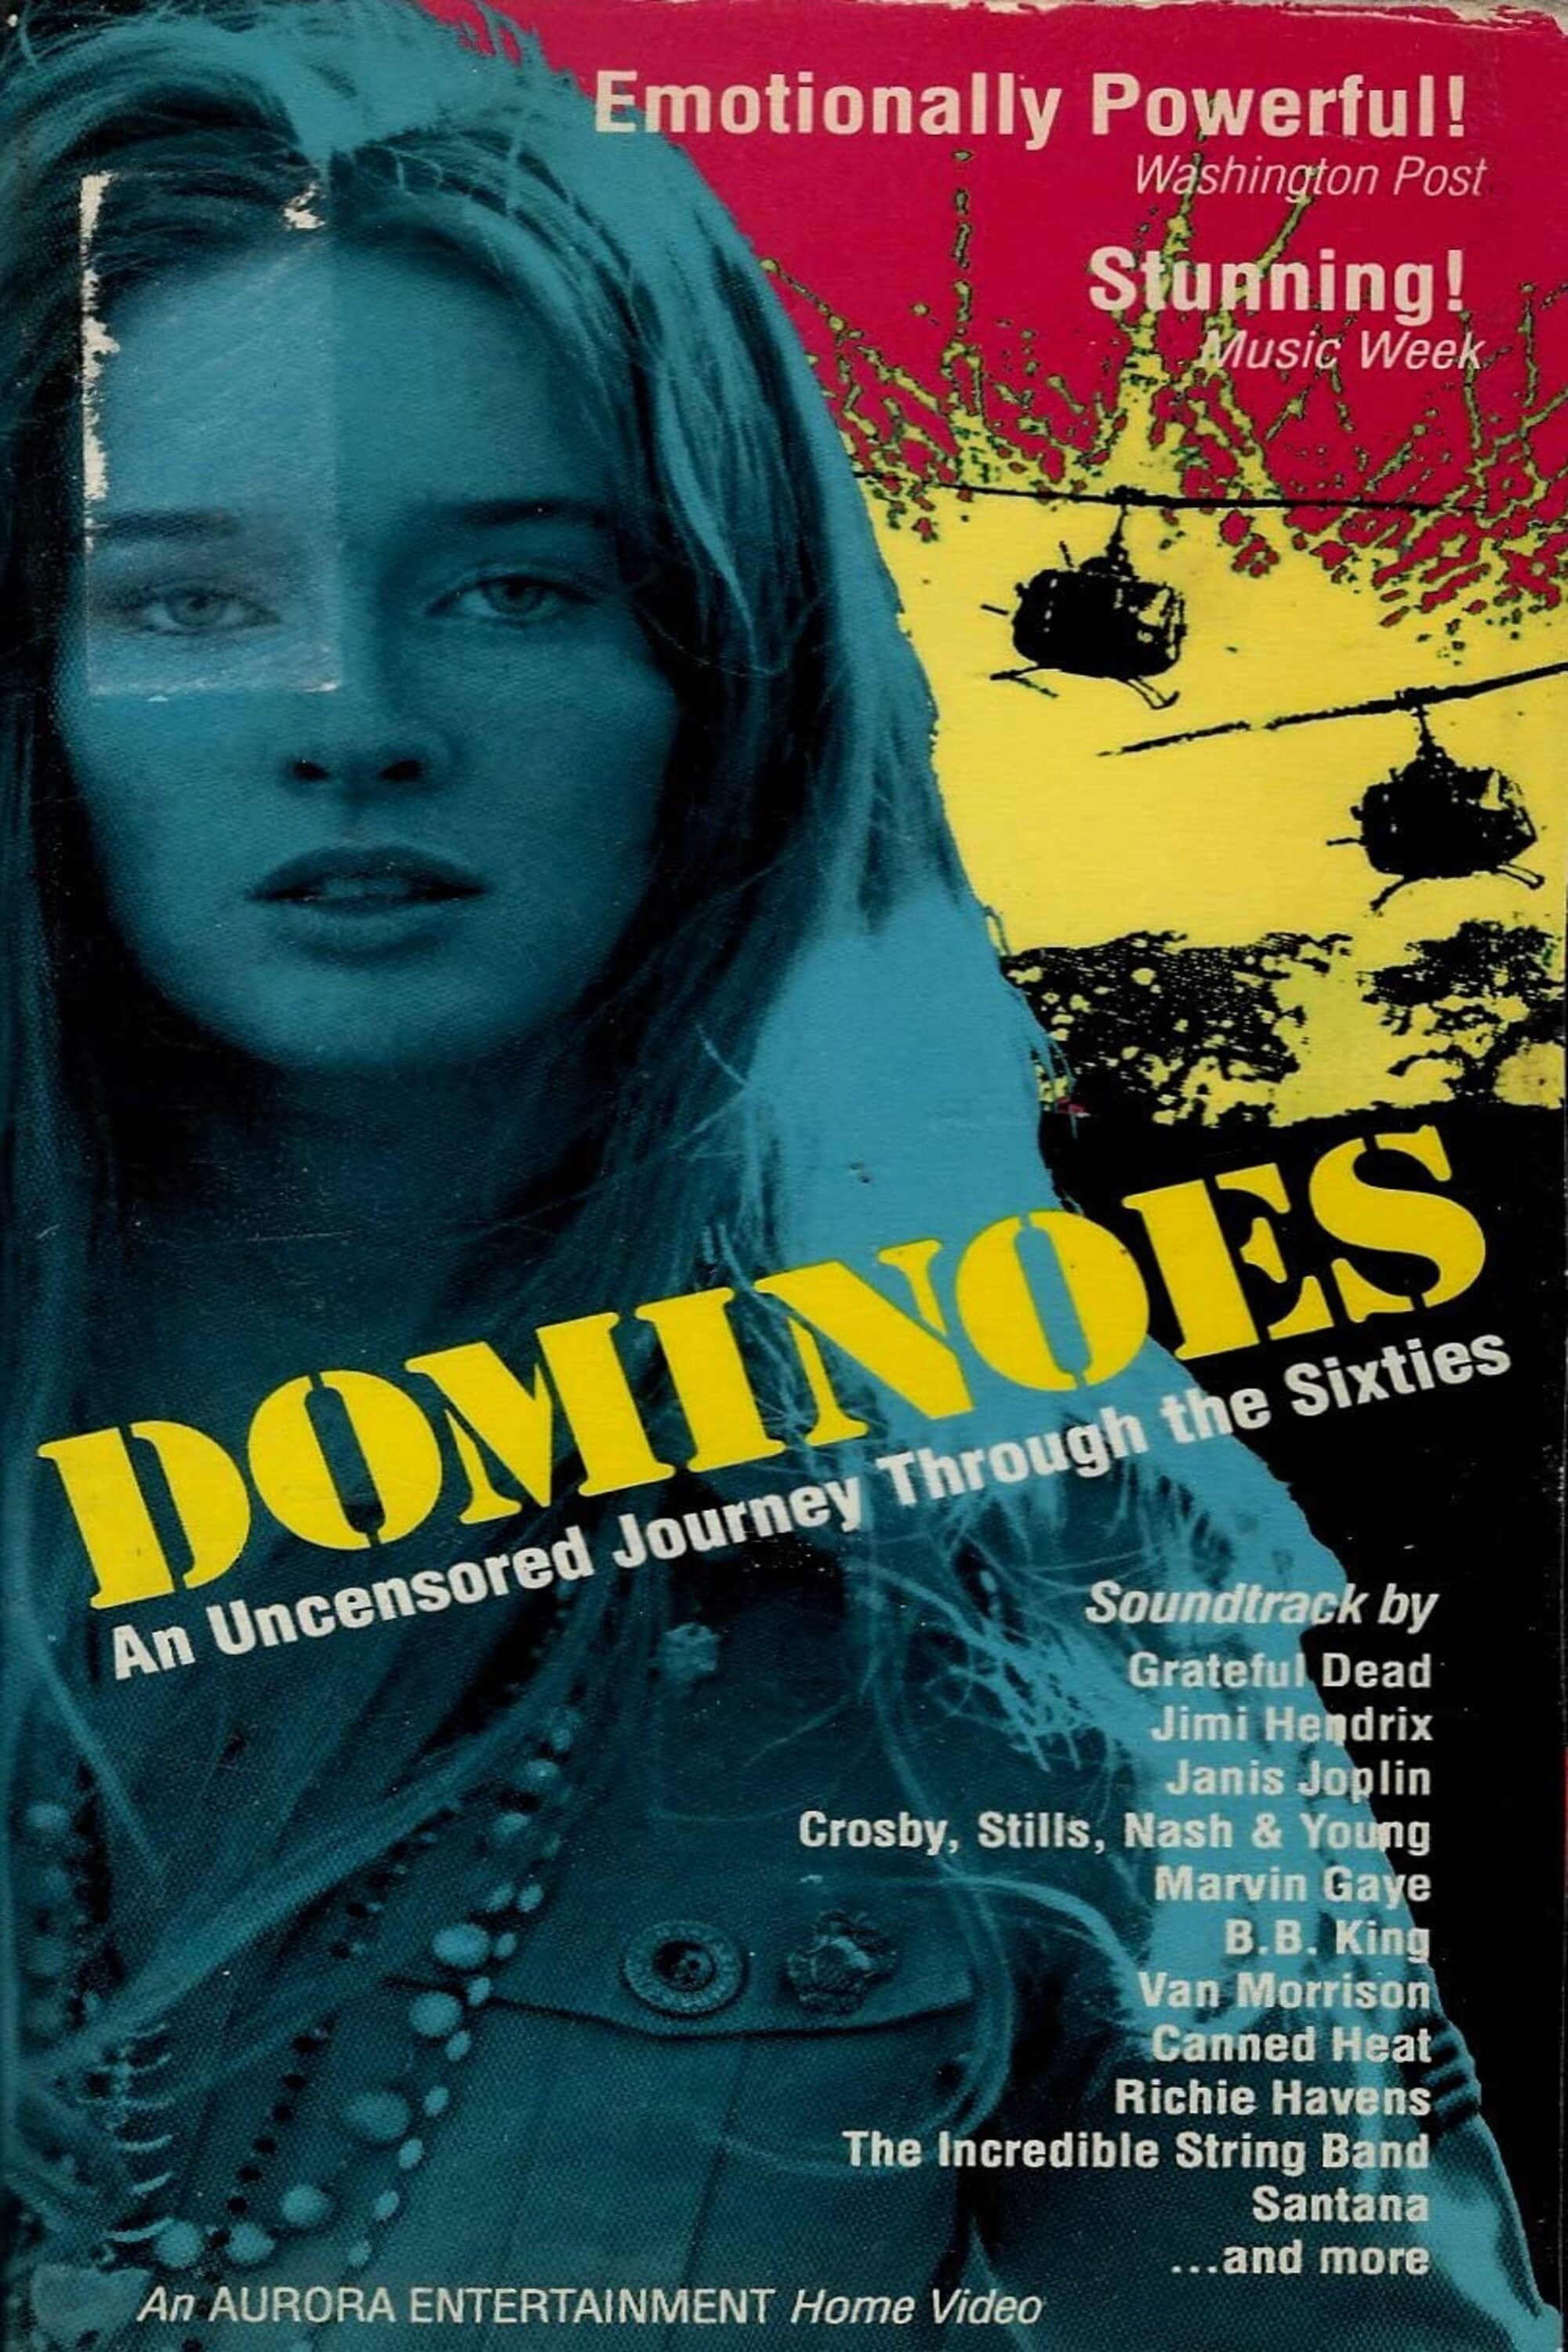 Dominoes: An Uncensored Journey Through the Sixties